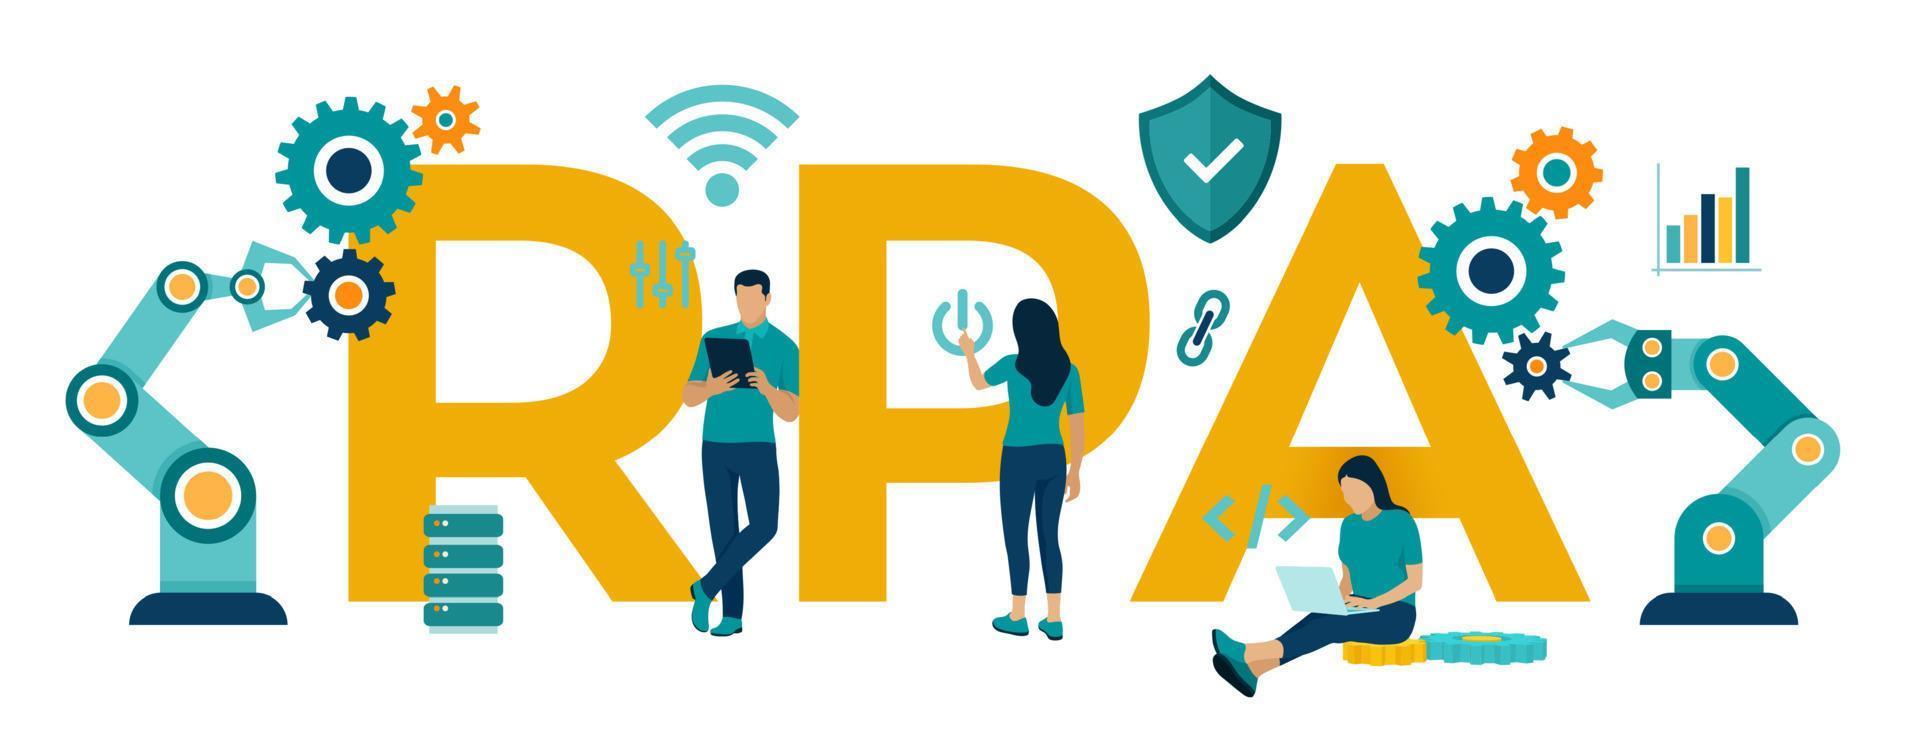 RPA Robotic process automation innovation technology concept. Intelligent system automation. AI. Artificial intelligence. Colourful flat style vector illustration with characters and icons.